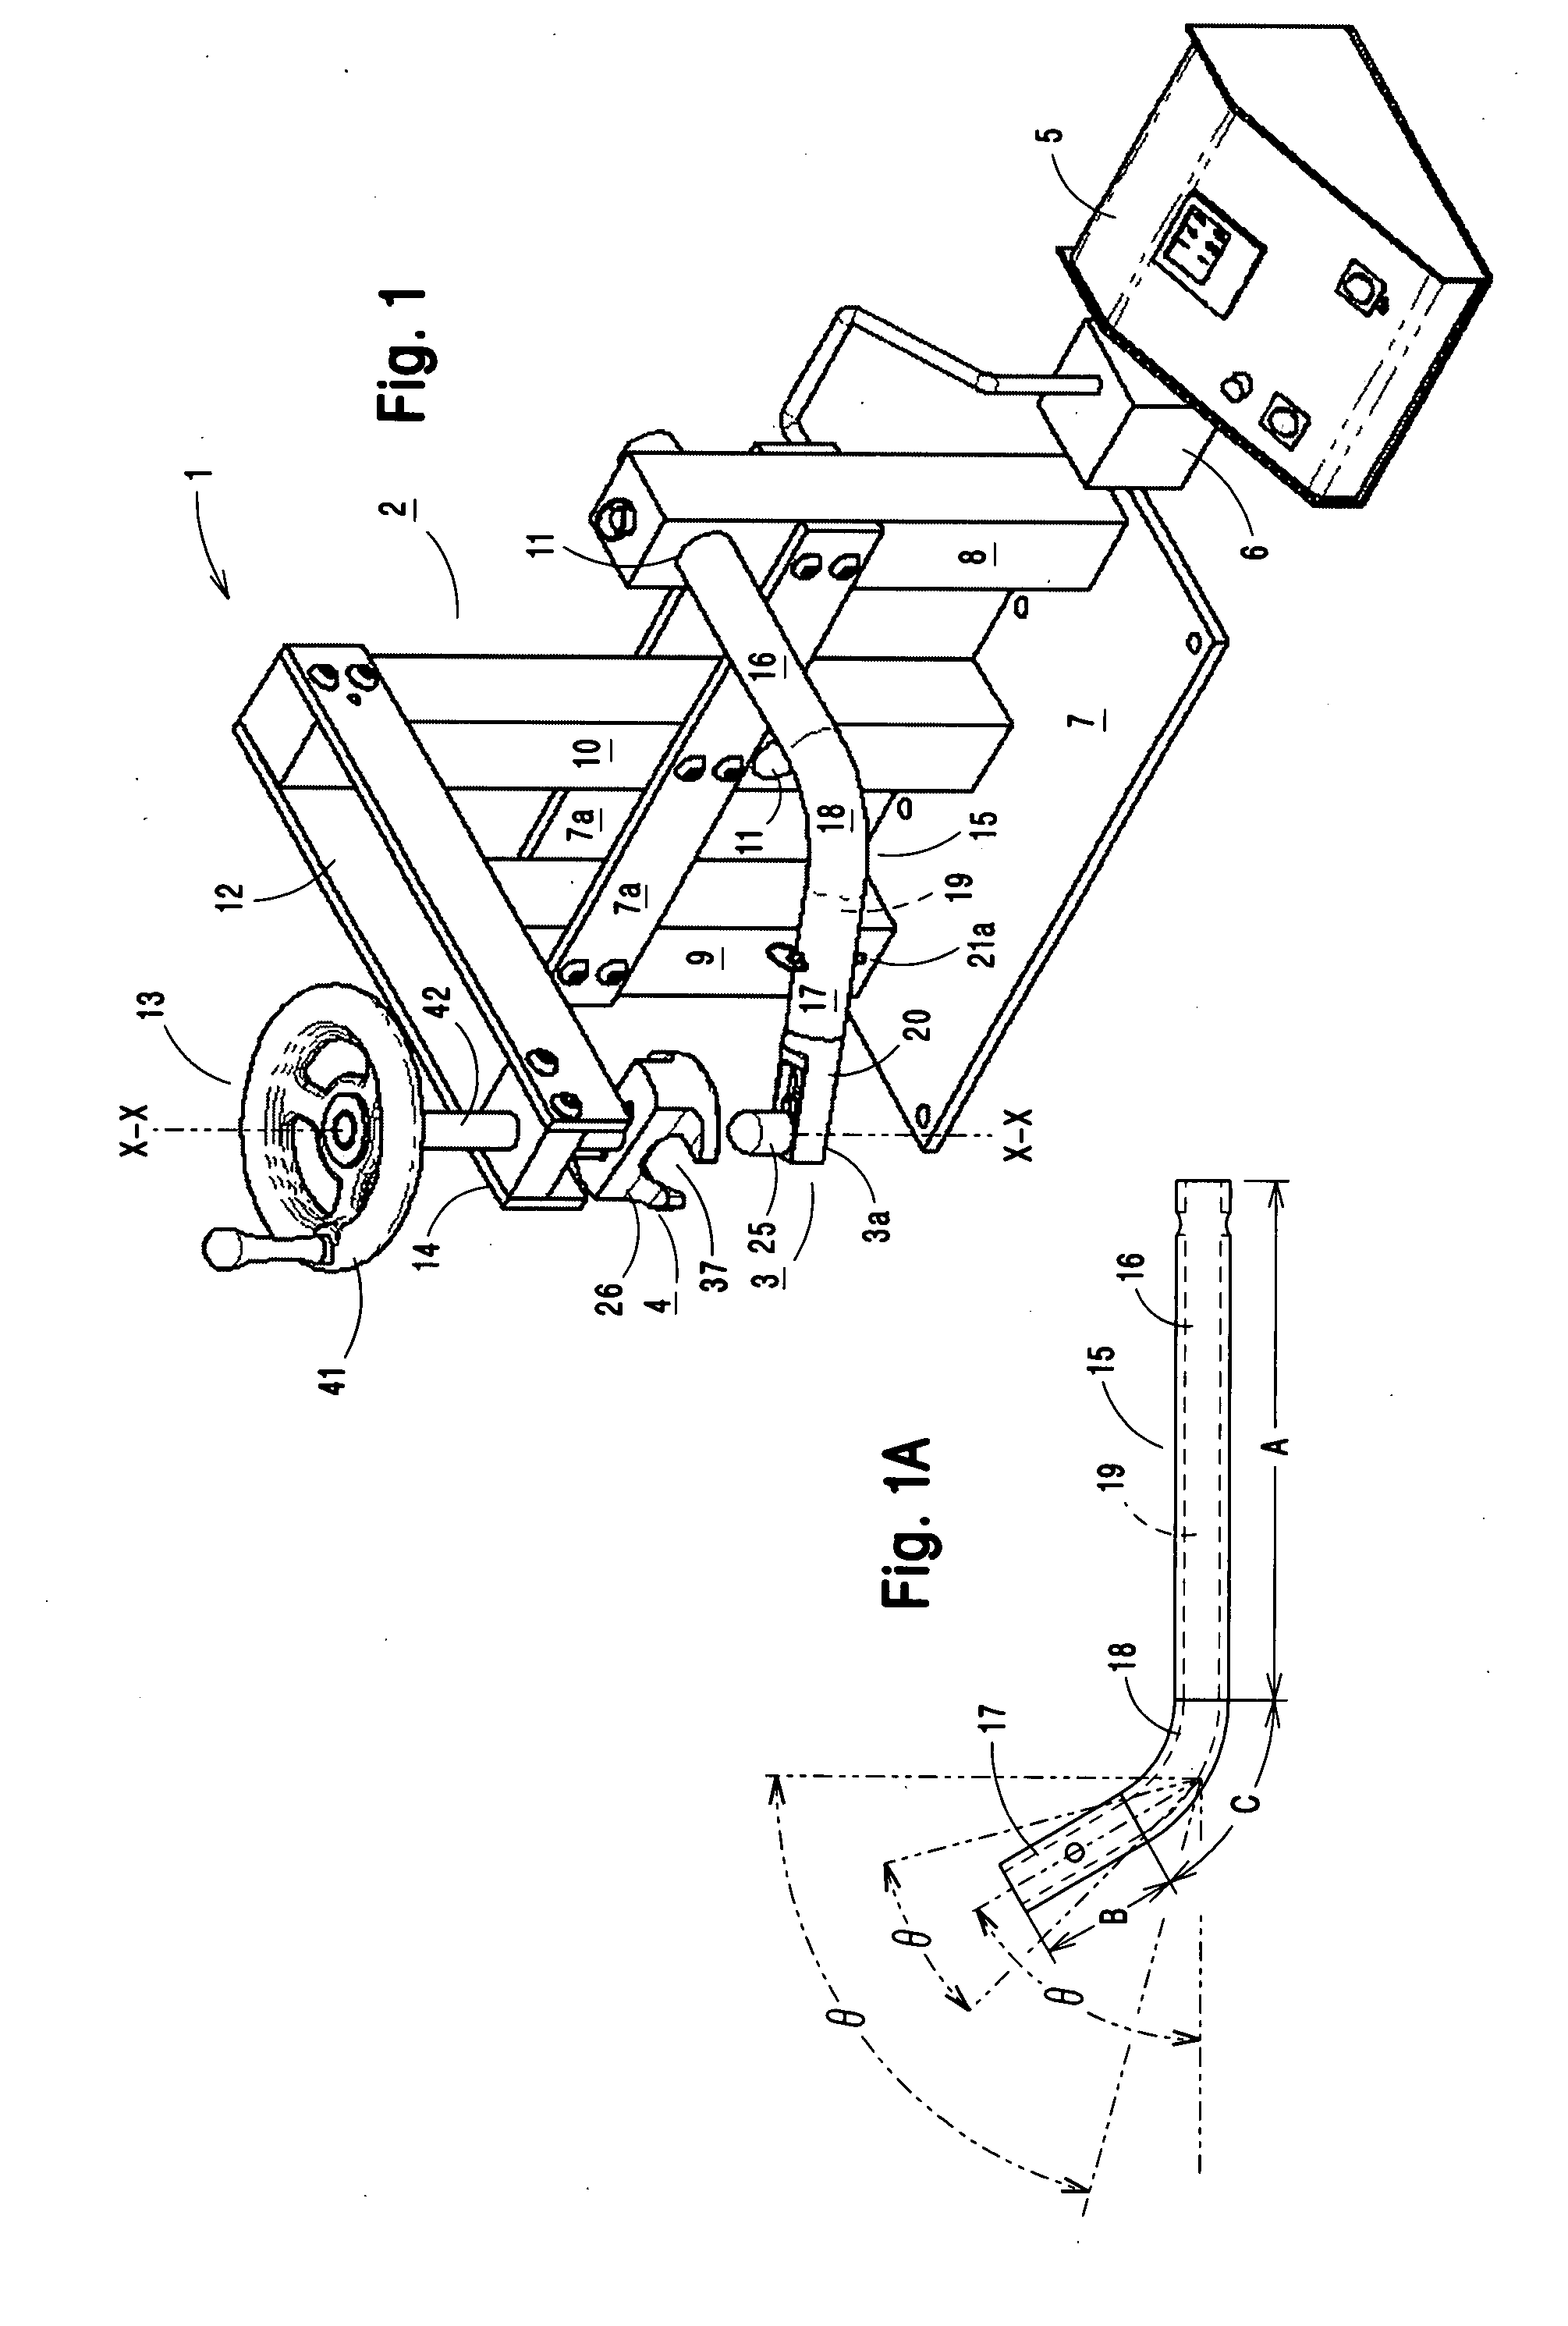 Apparatus for reshaping footwear and the method thereof